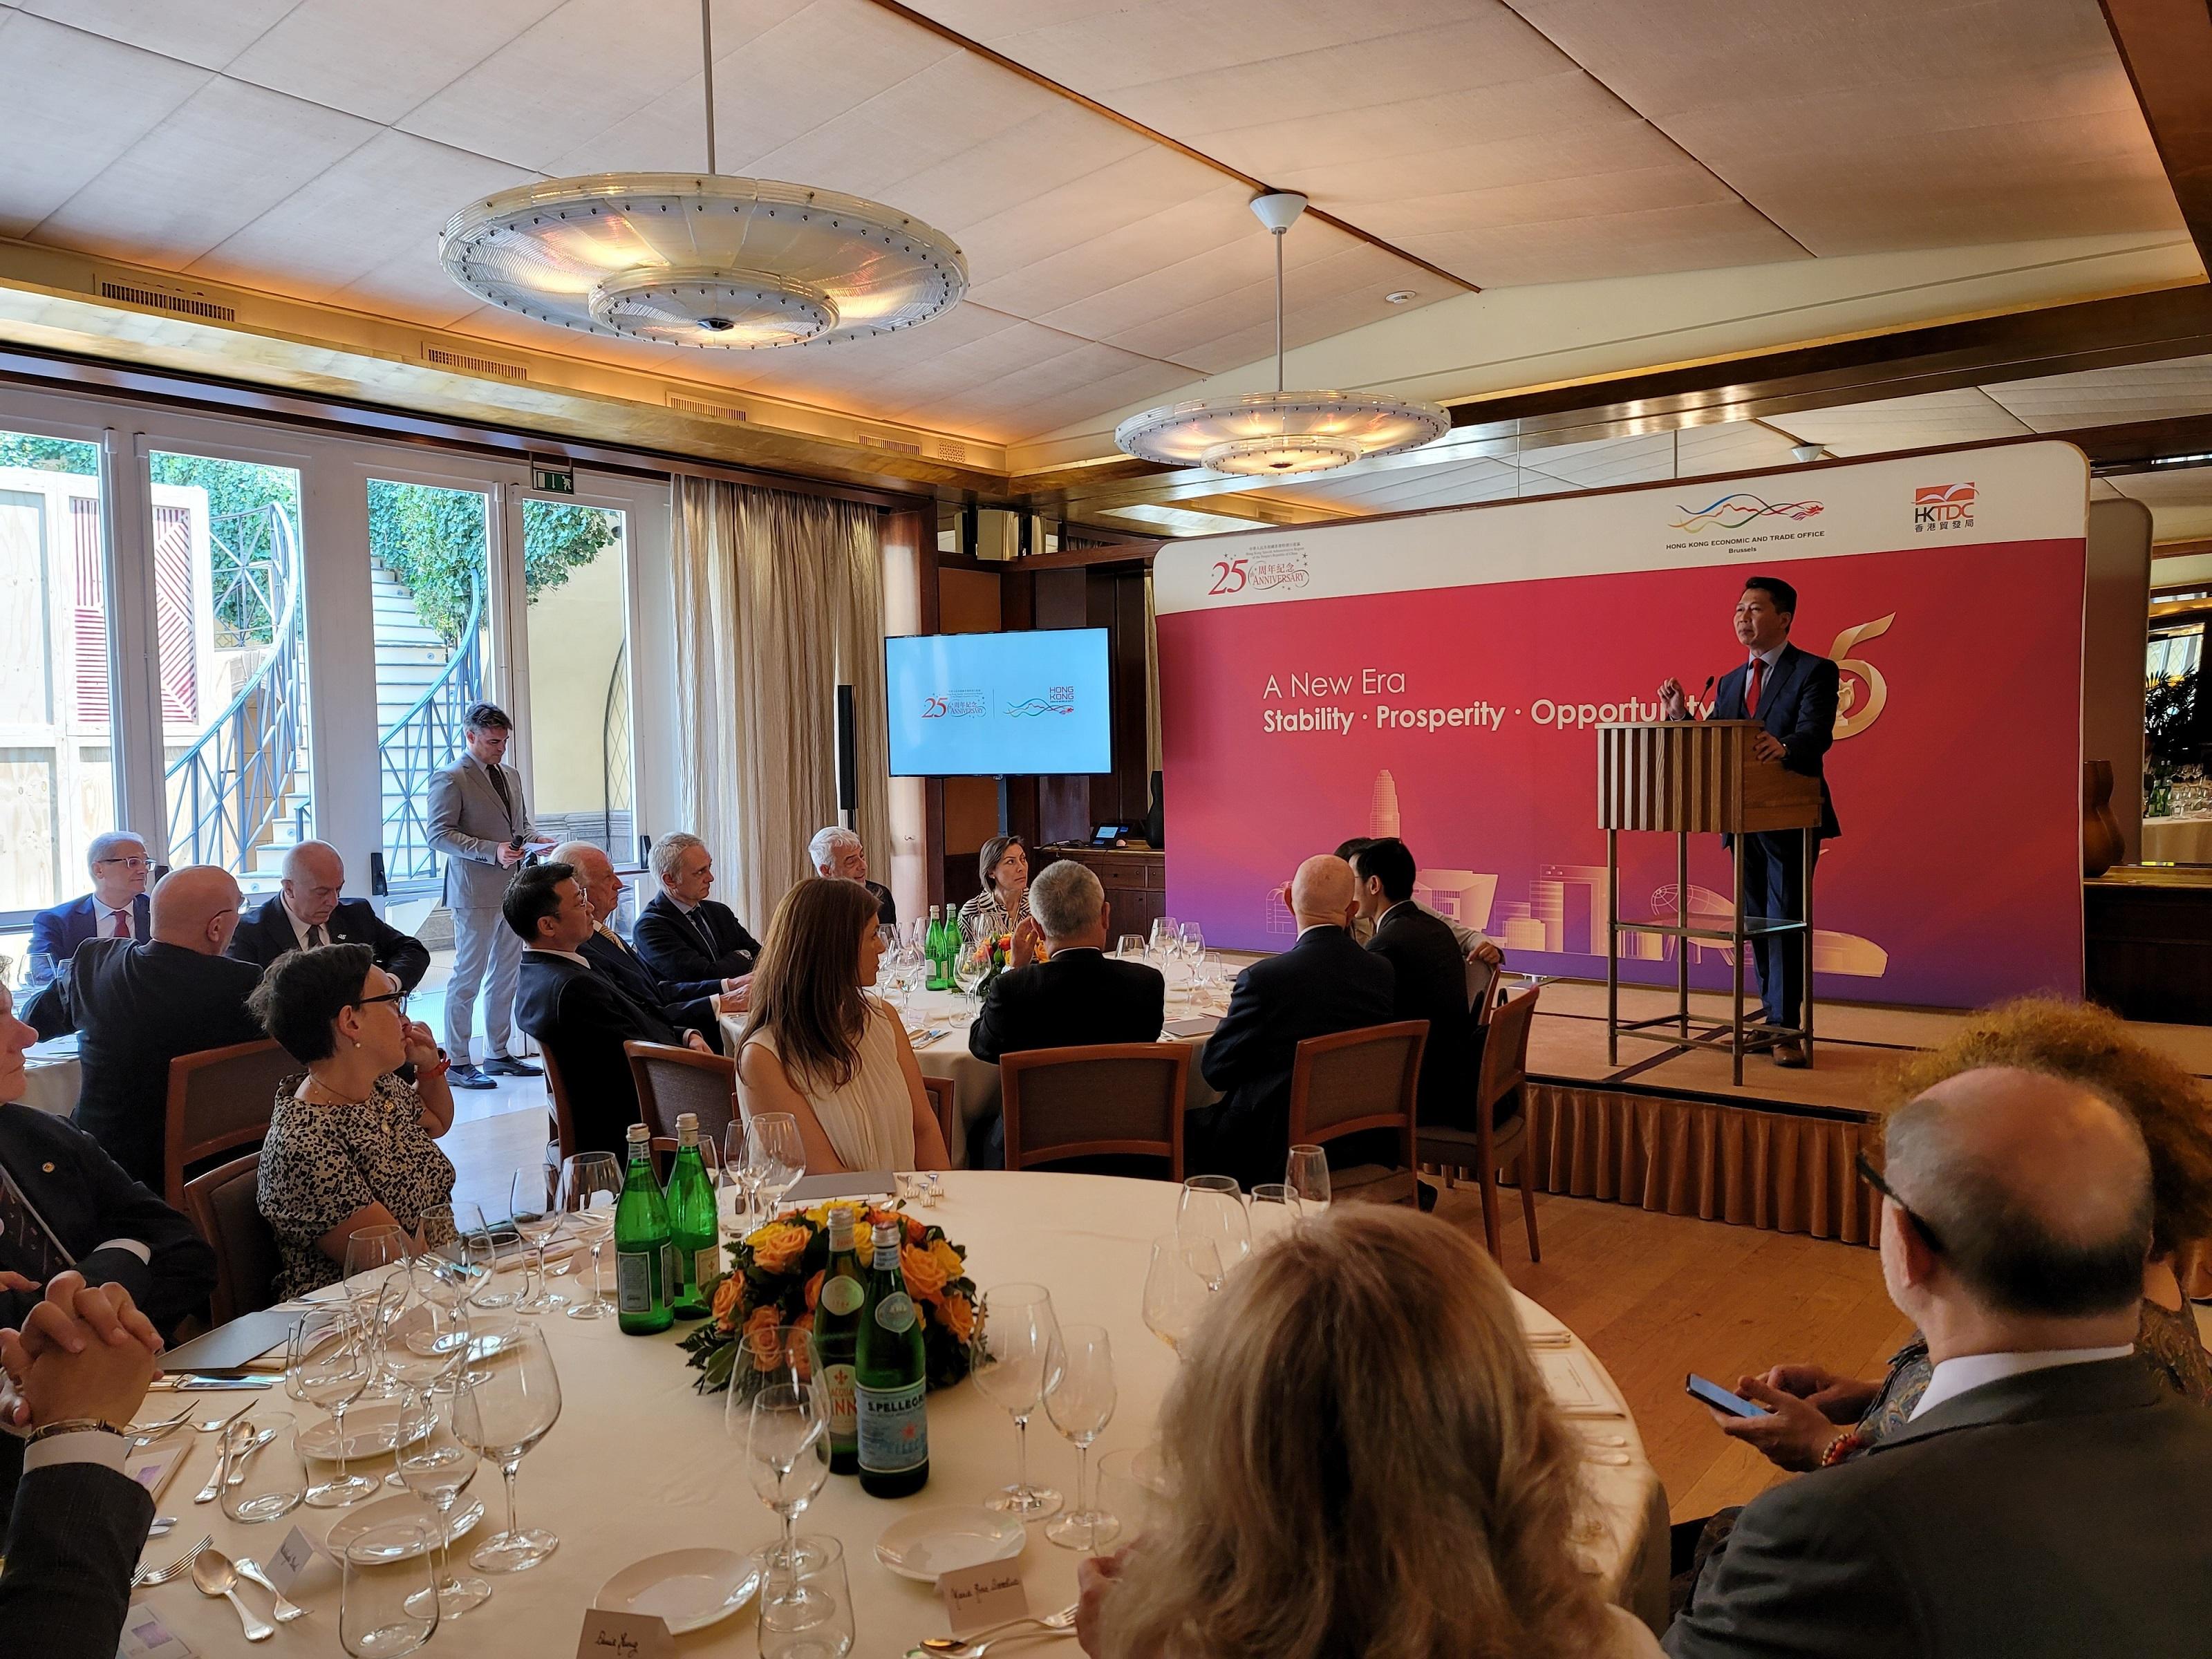 The Special Representative for Hong Kong Economic and Trade Affairs to the European Union, Mr Eddie Cheung, gives a speech at a business luncheon held in Milan, Italy, on June 14 (Milan time) to celebrate the 25th anniversary of the establishment of the Hong Kong Special Administrative Region.